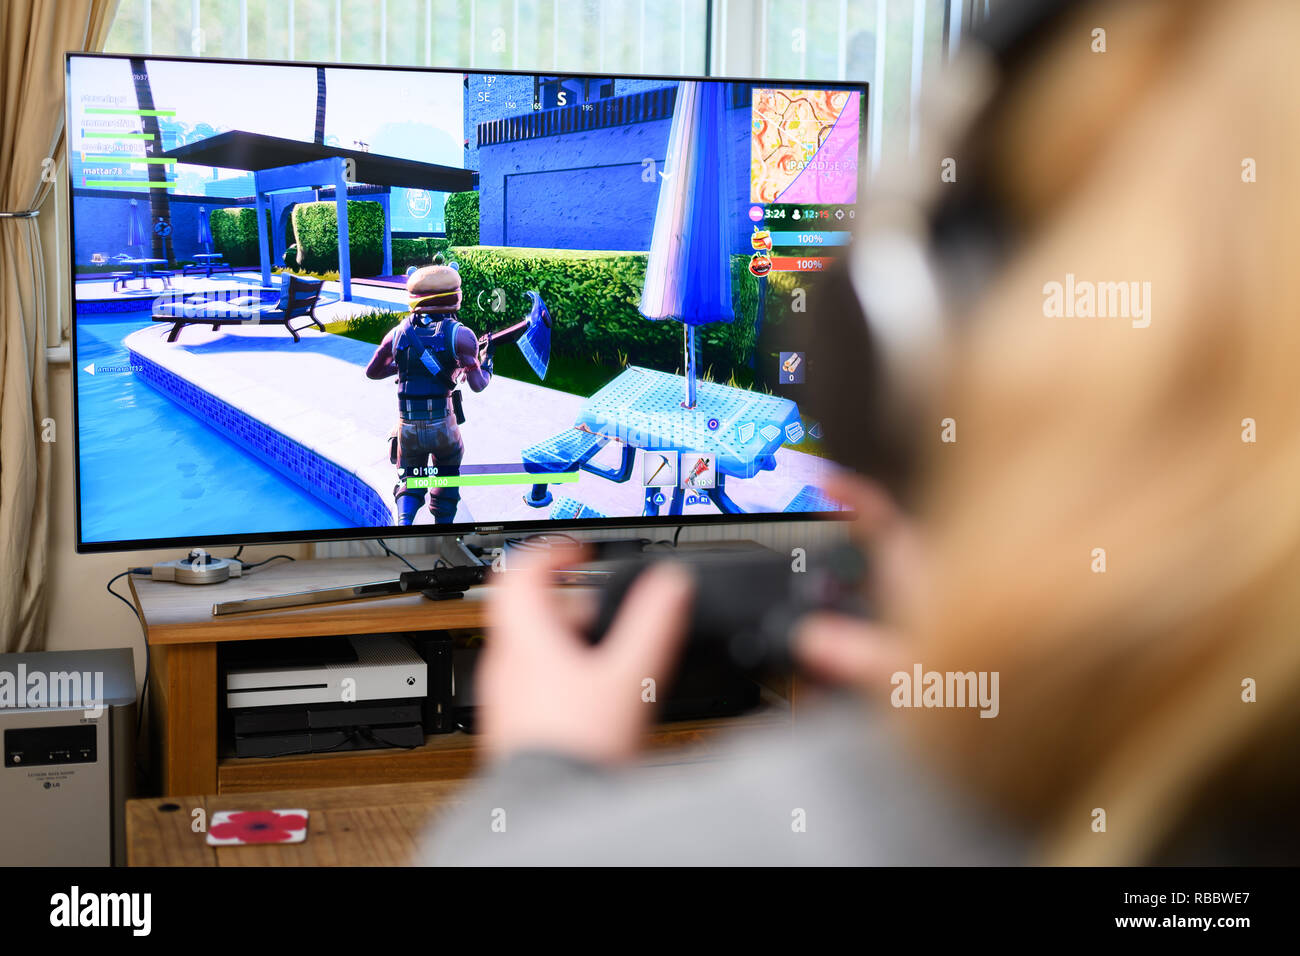 Cardiff, Wales - January 09, 2019: Teenager Girl playing Fortnite video game, Fortnite is a web based multi player survival game developed by Epic Gam Stock Photo